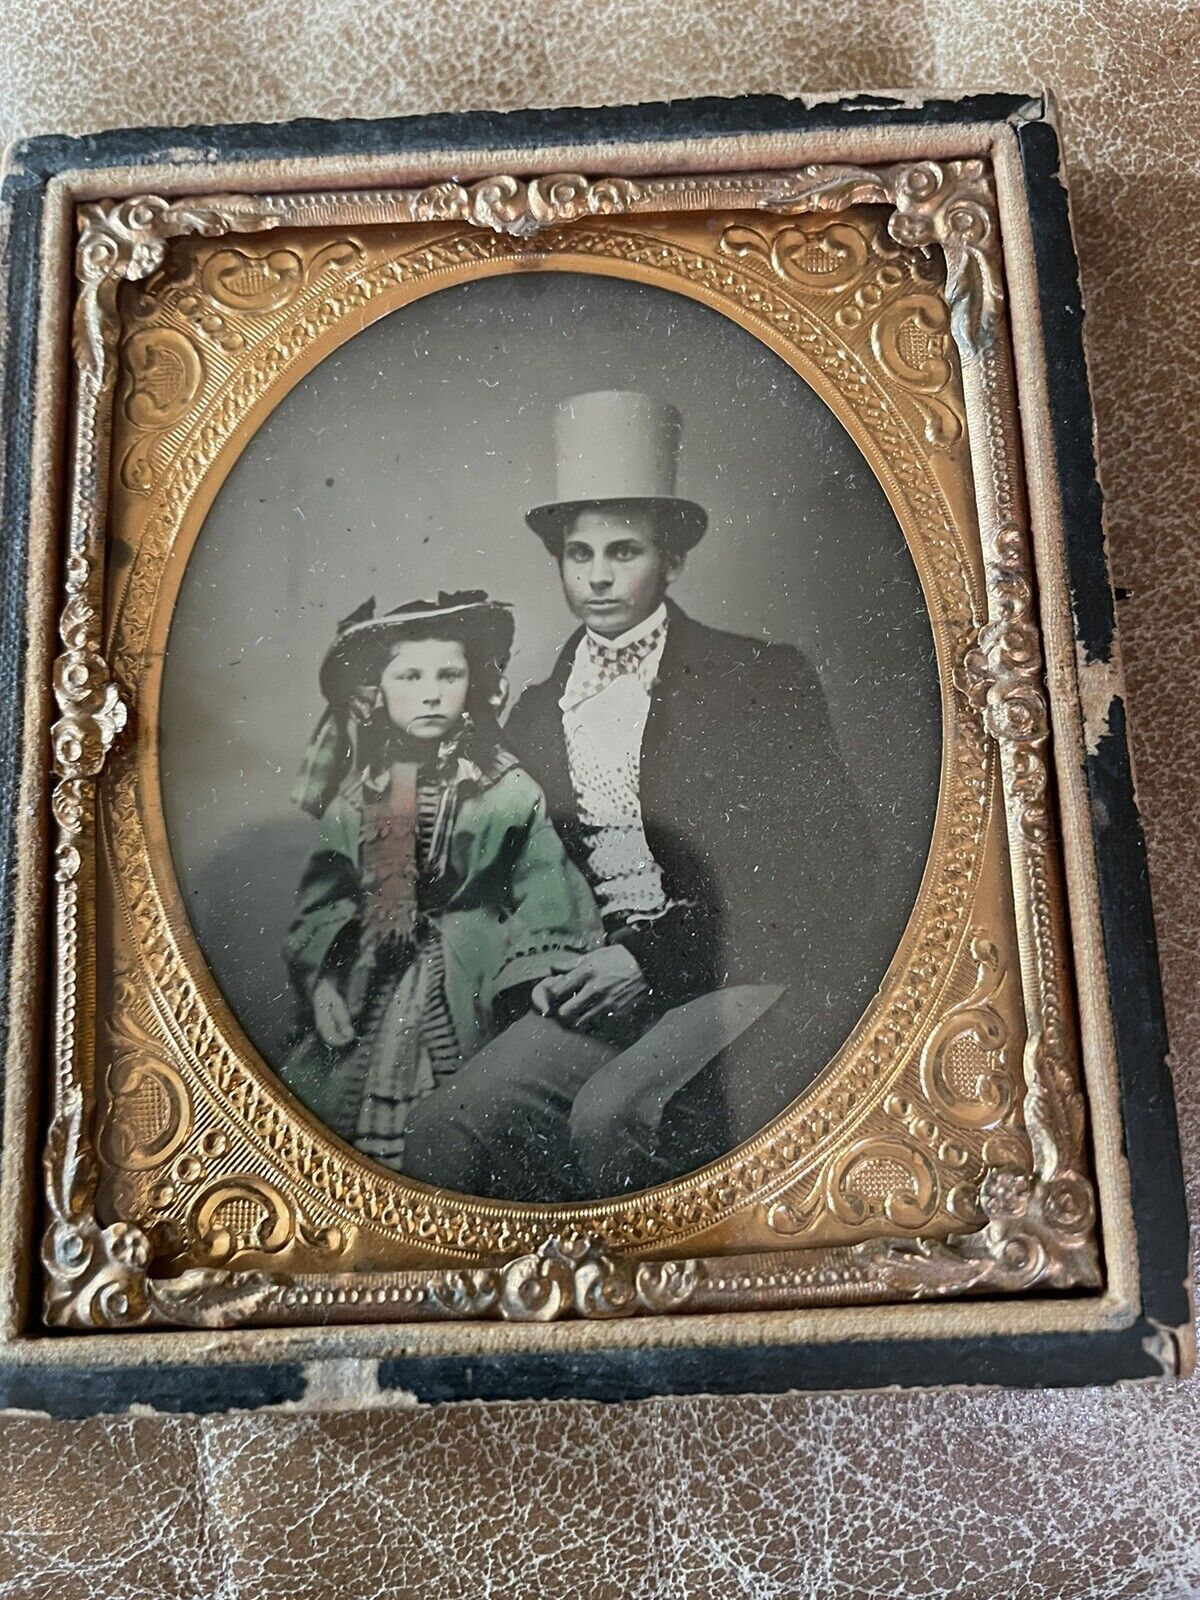 Stunning c.1860 -70 Ambrotype /Daguerreotype Photograph of Man Top Hat and girl